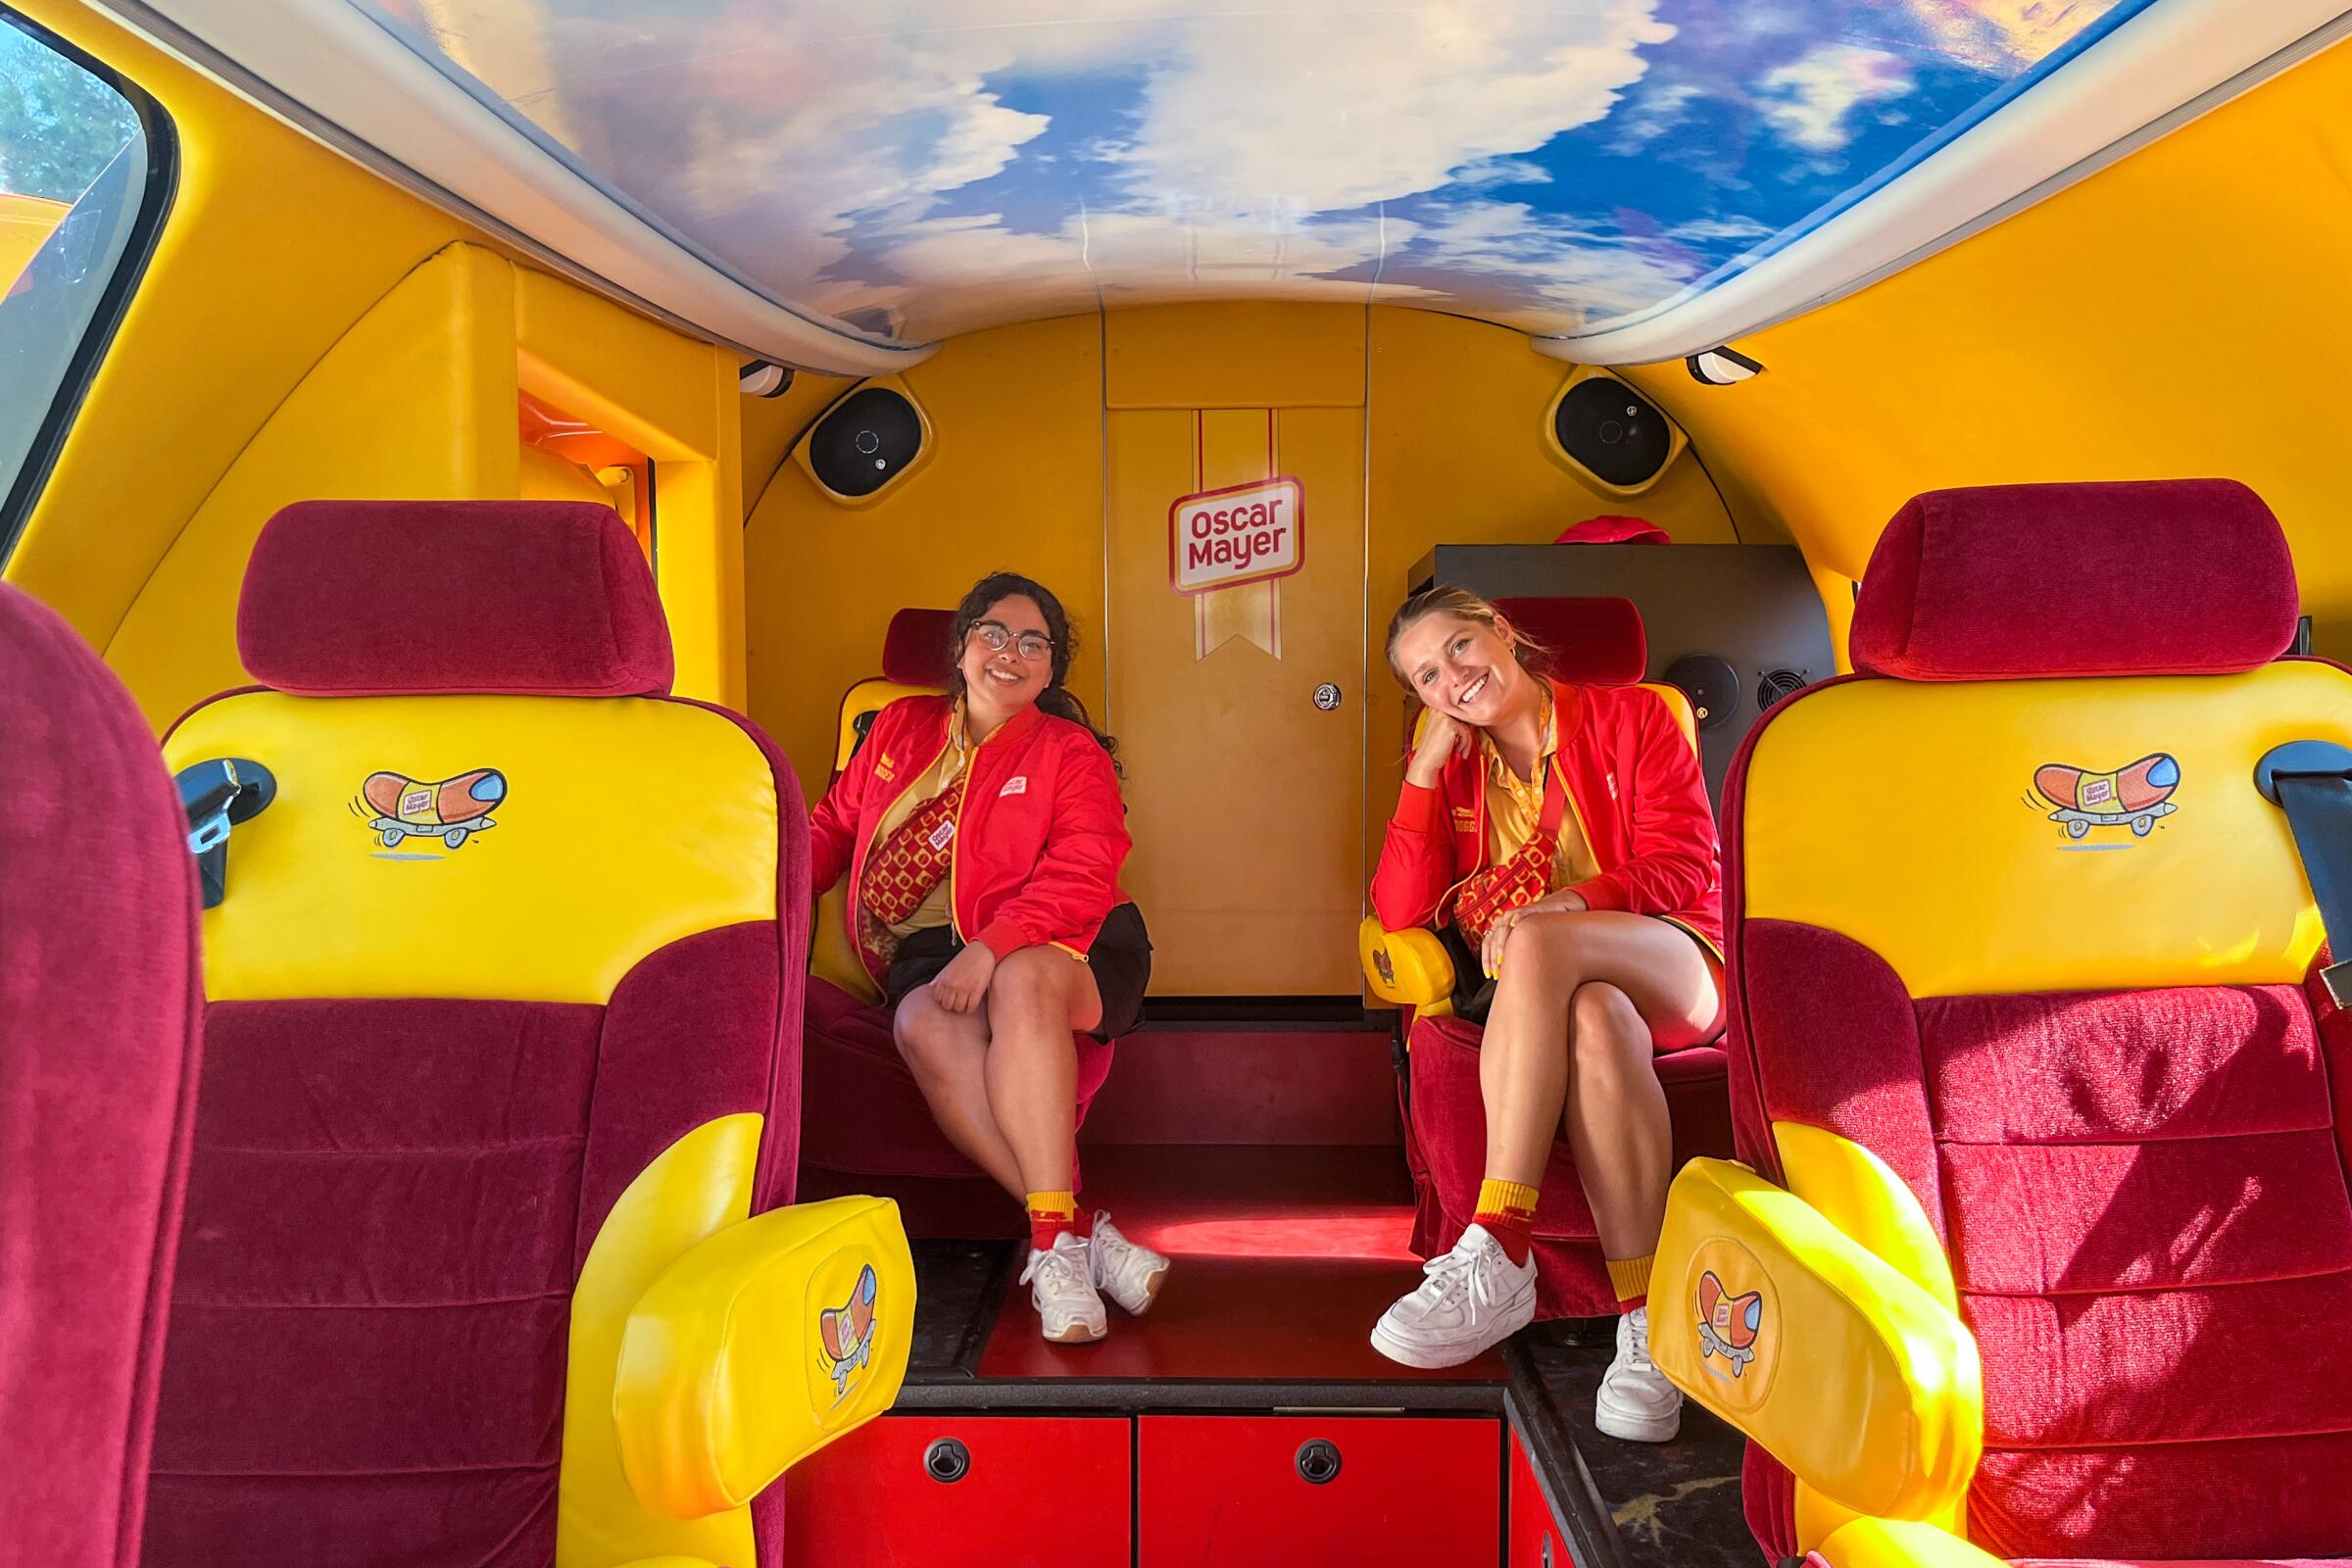 Two women sit in the back of a vehicle whose interior is yellow and red.